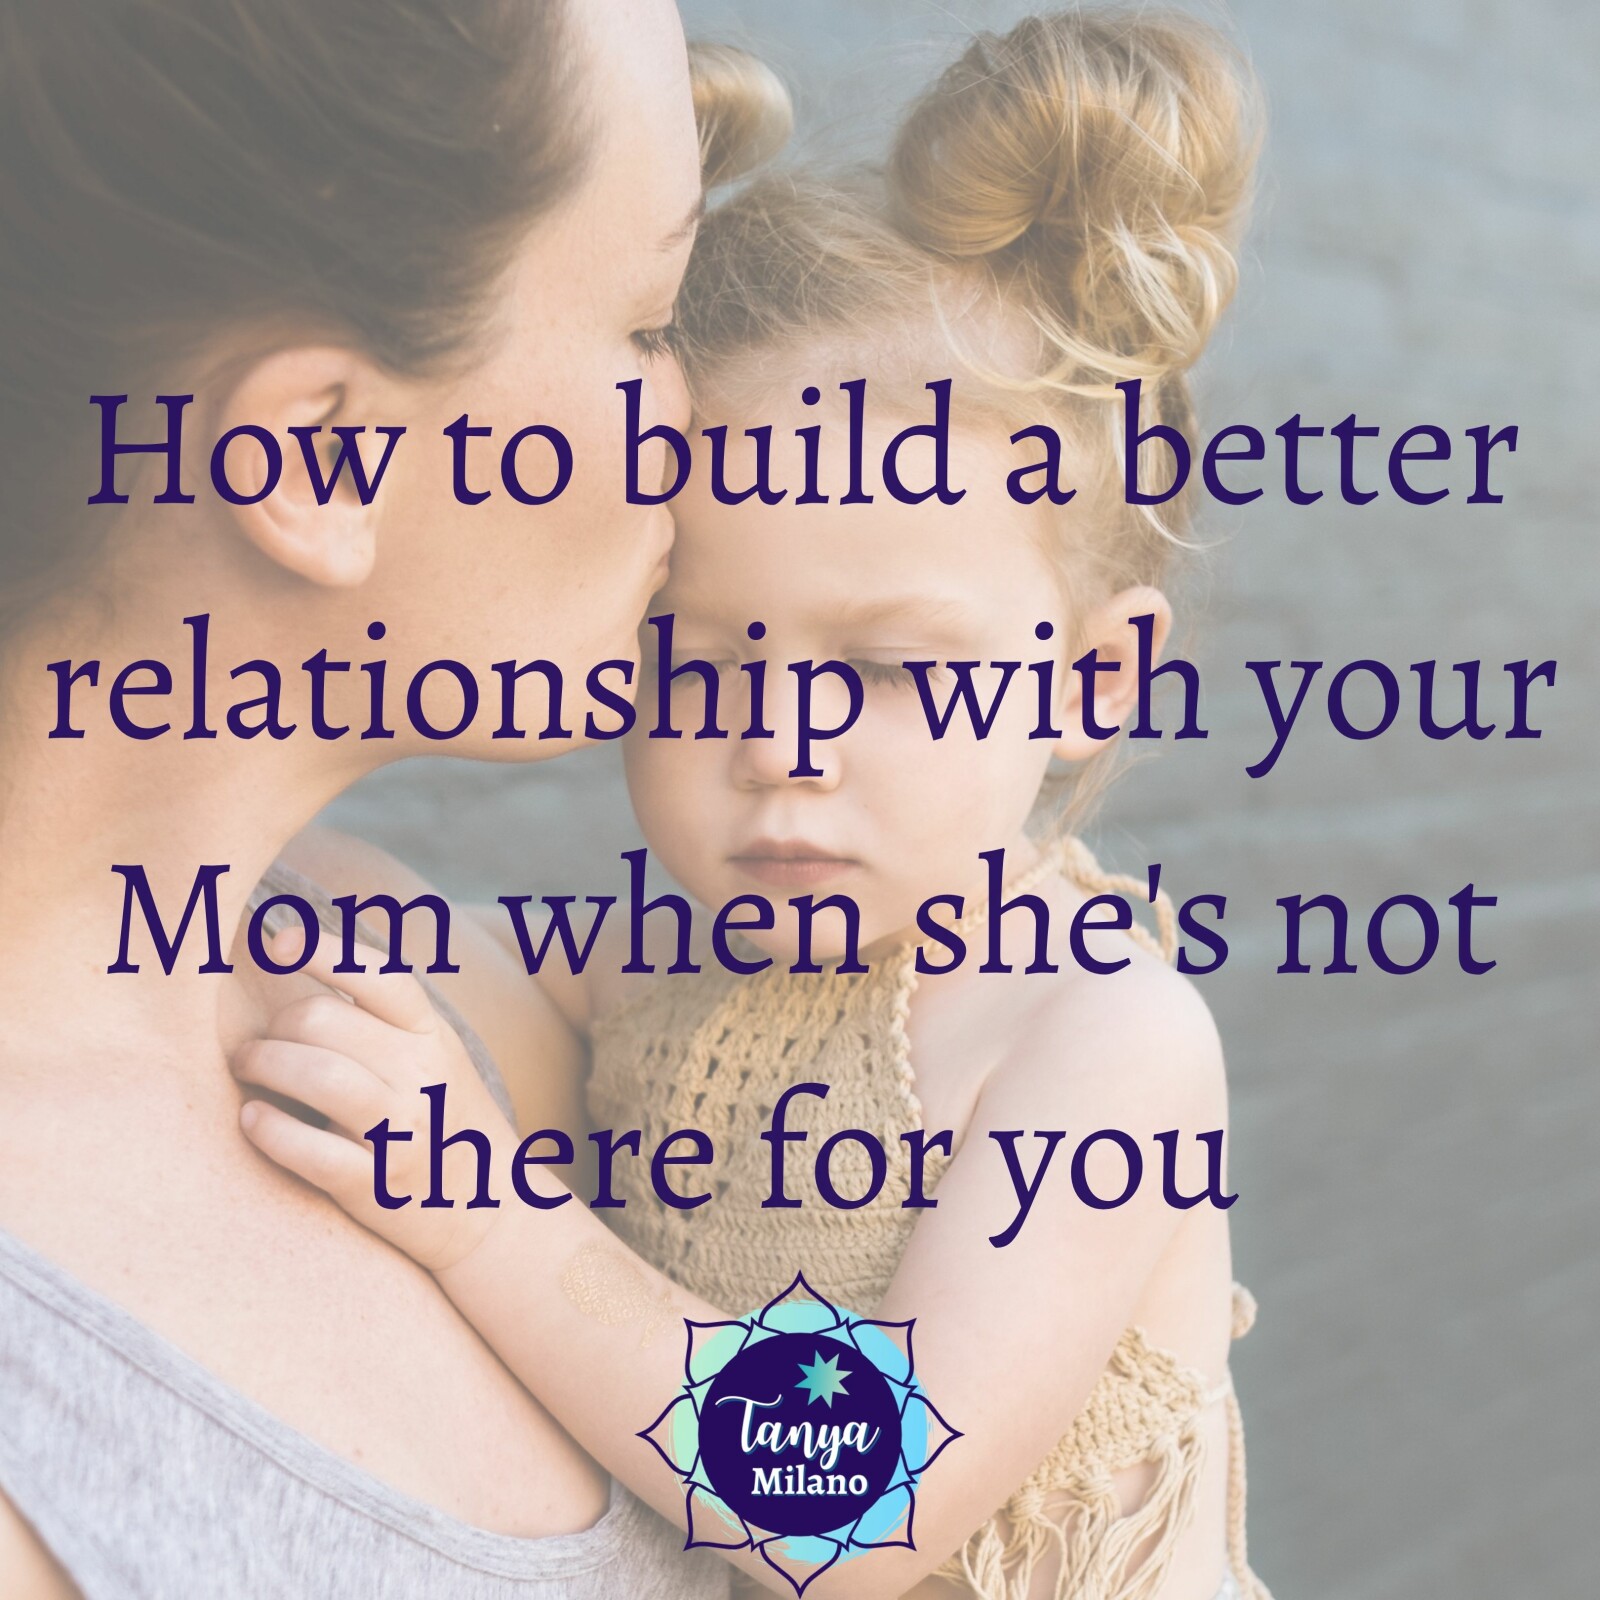 How to build a better relationship with your Mom when she's not there for you